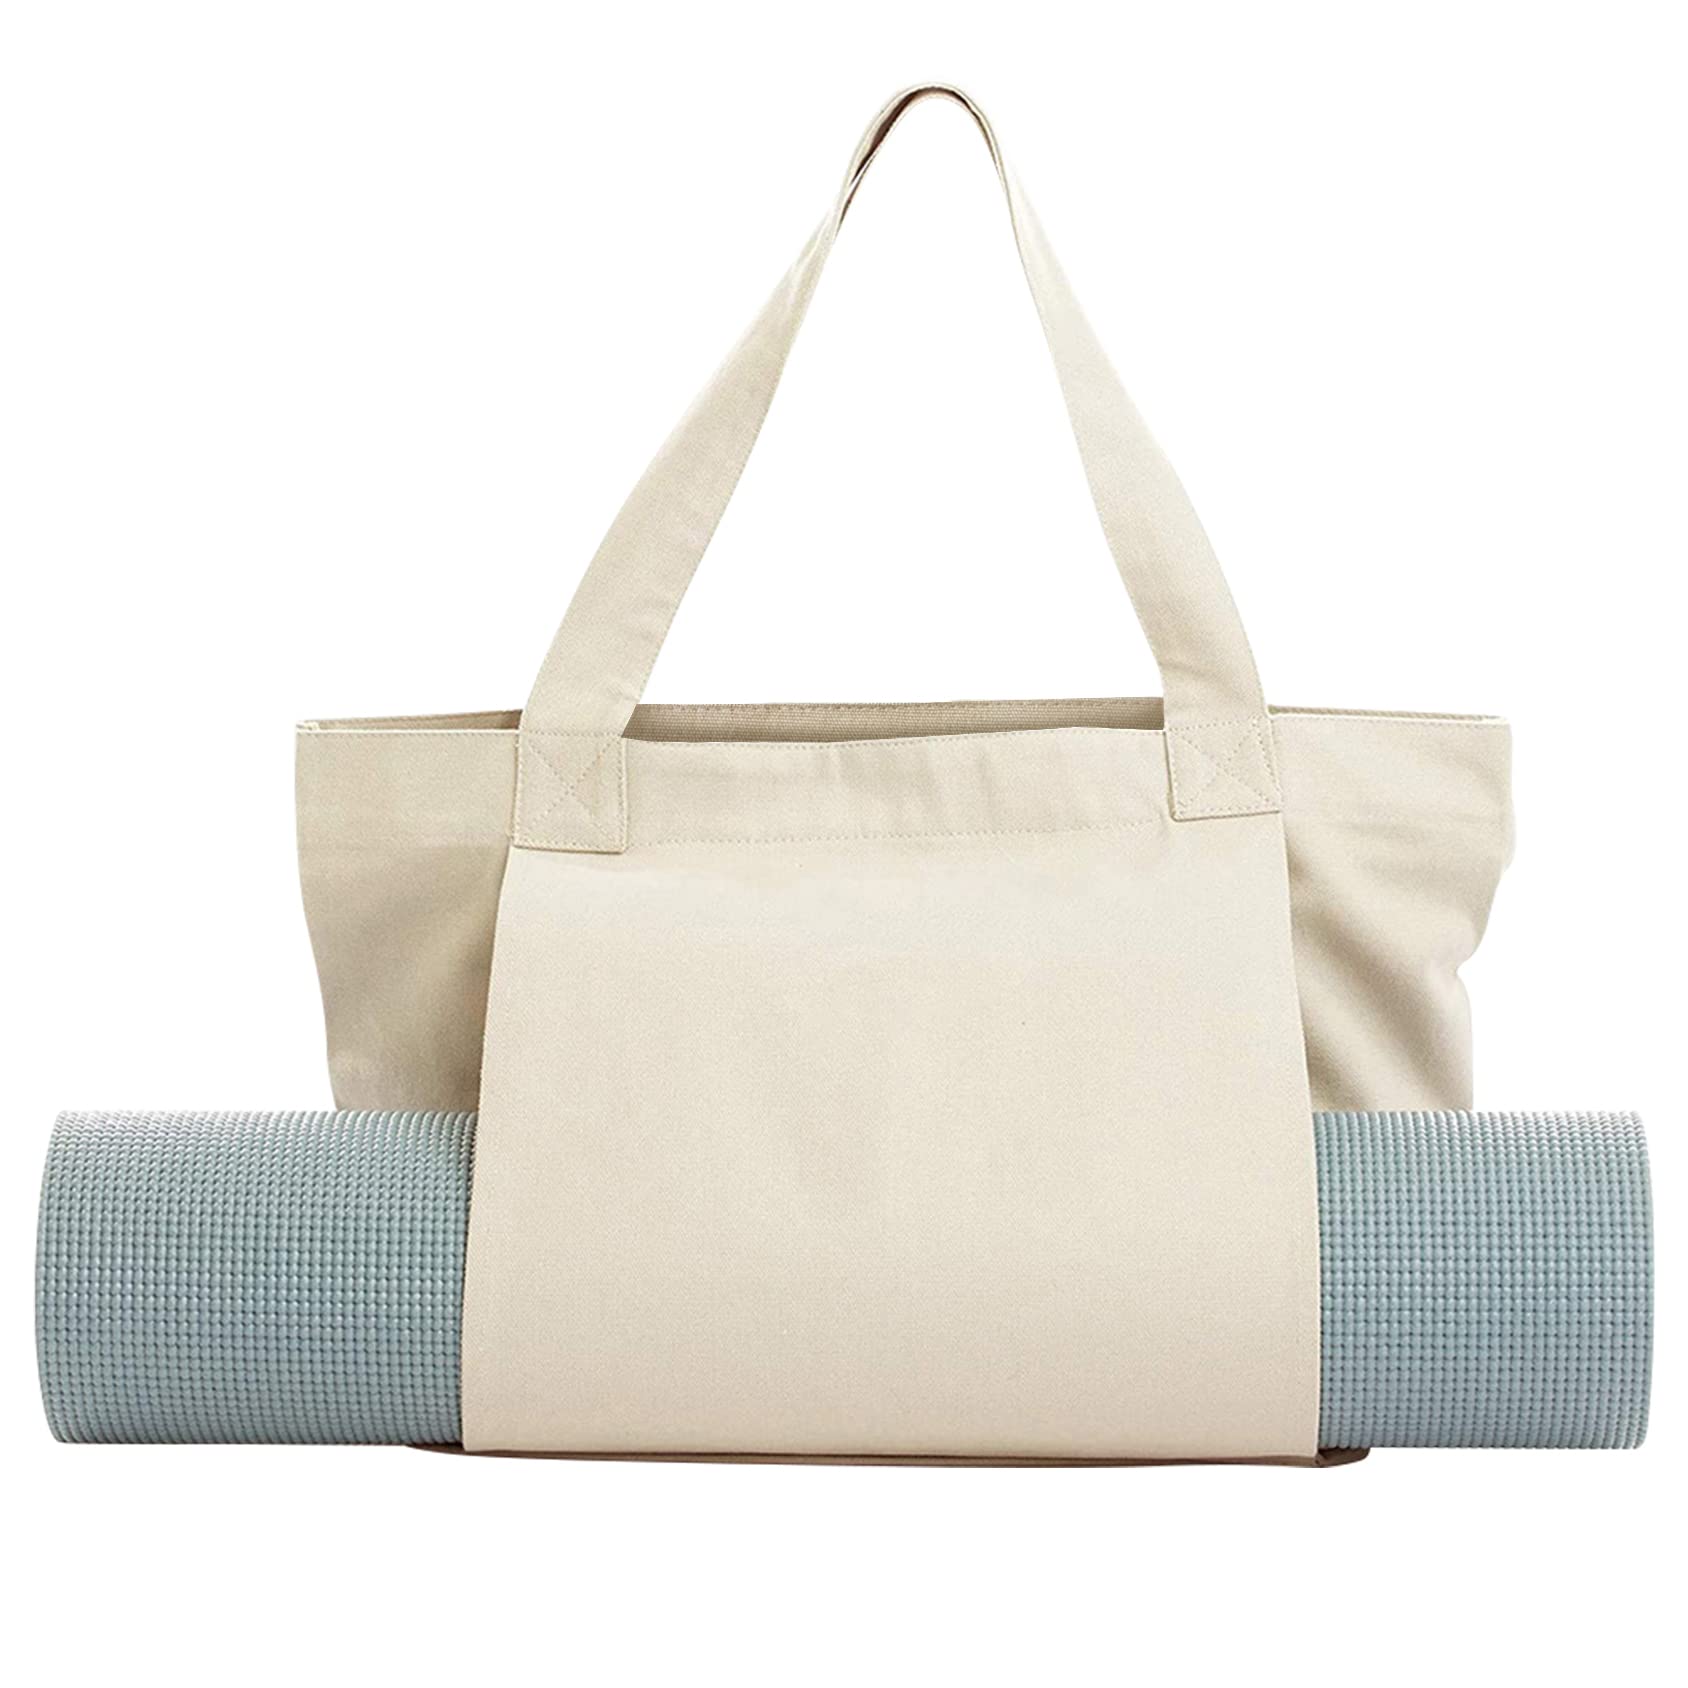 Yoga Mat Bag Carrier for Women ,Shoulder Bag Carryall Canvas Gym Tote Bag  for Office, Workout, Pilates, Travel and Beach